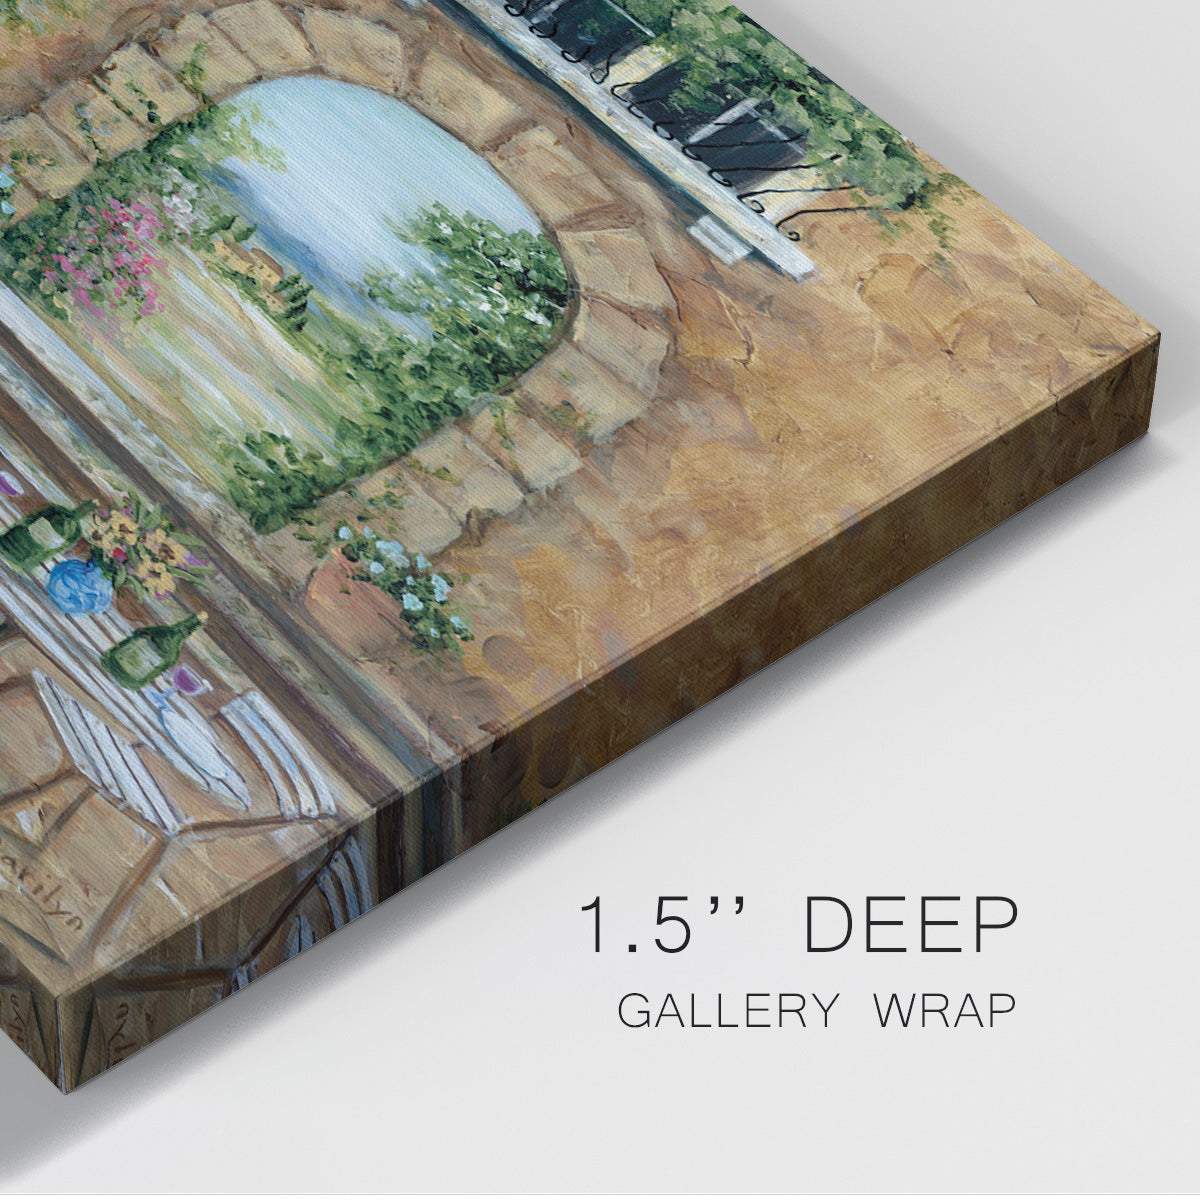 Tuscan Courtyard Premium Gallery Wrapped Canvas - Ready to Hang